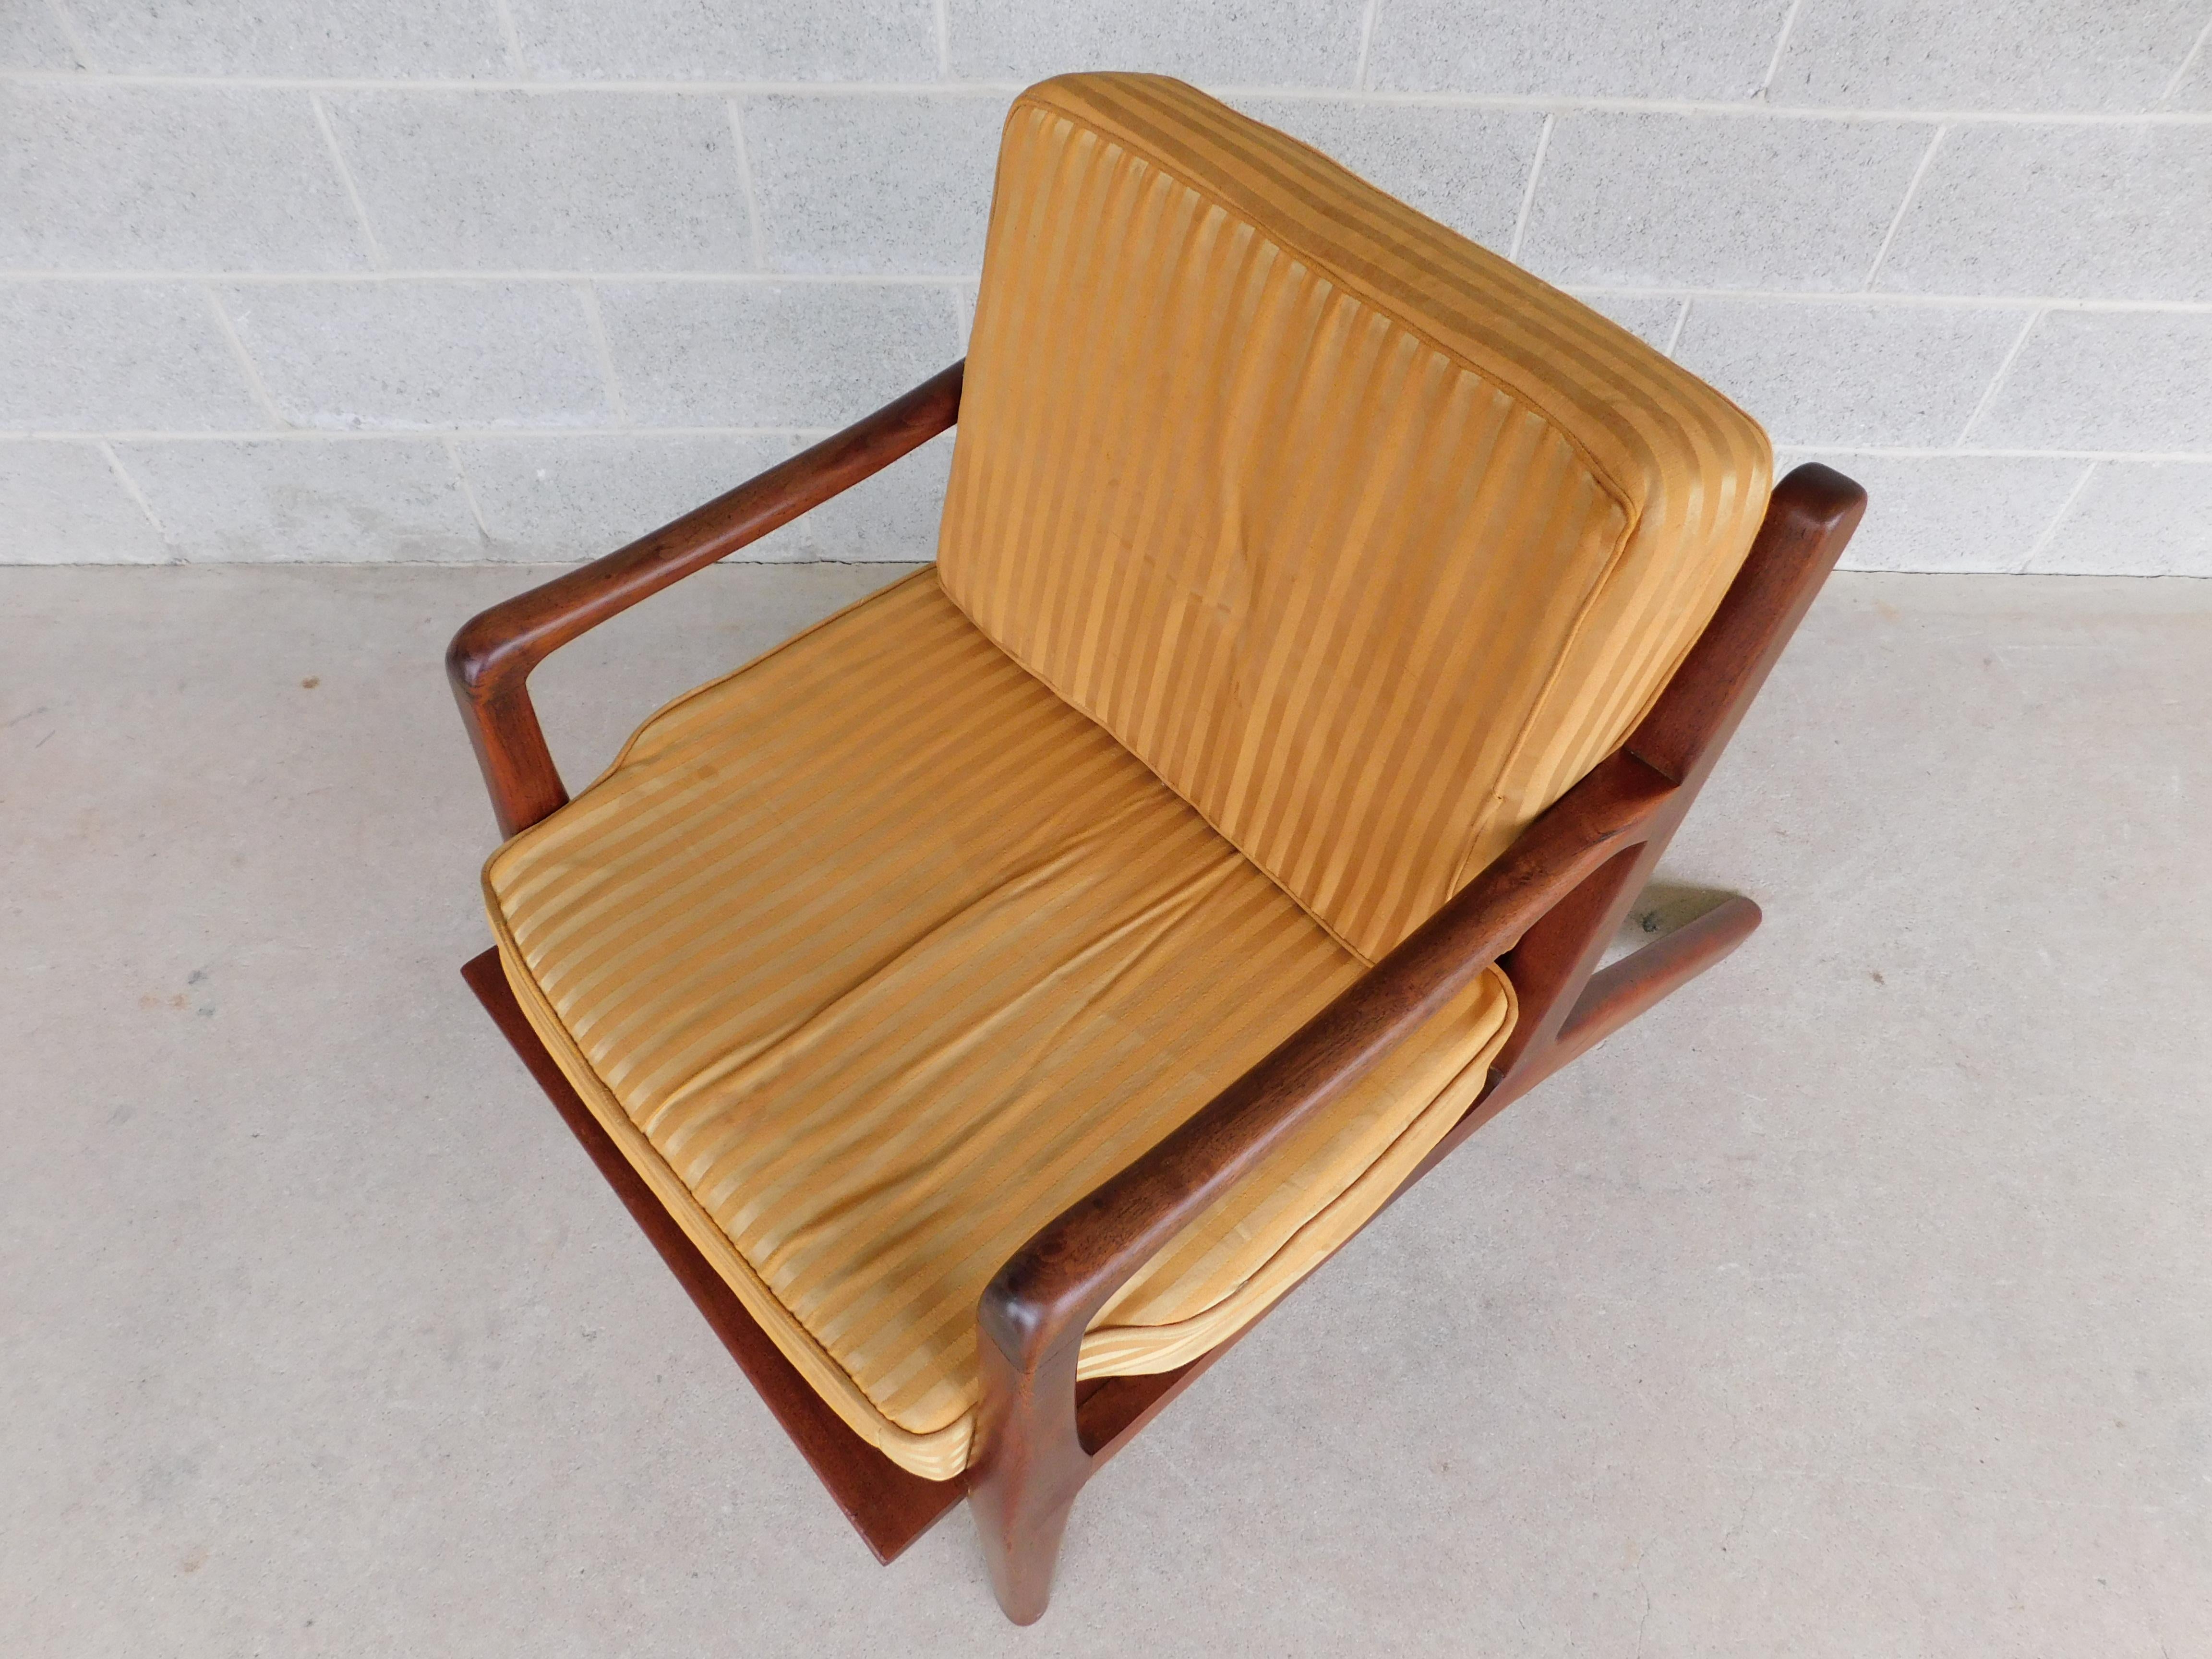 Vintage Teak Midcentury Lounge Chair Attributed to Hans Wegner In Good Condition For Sale In Parkesburg, PA